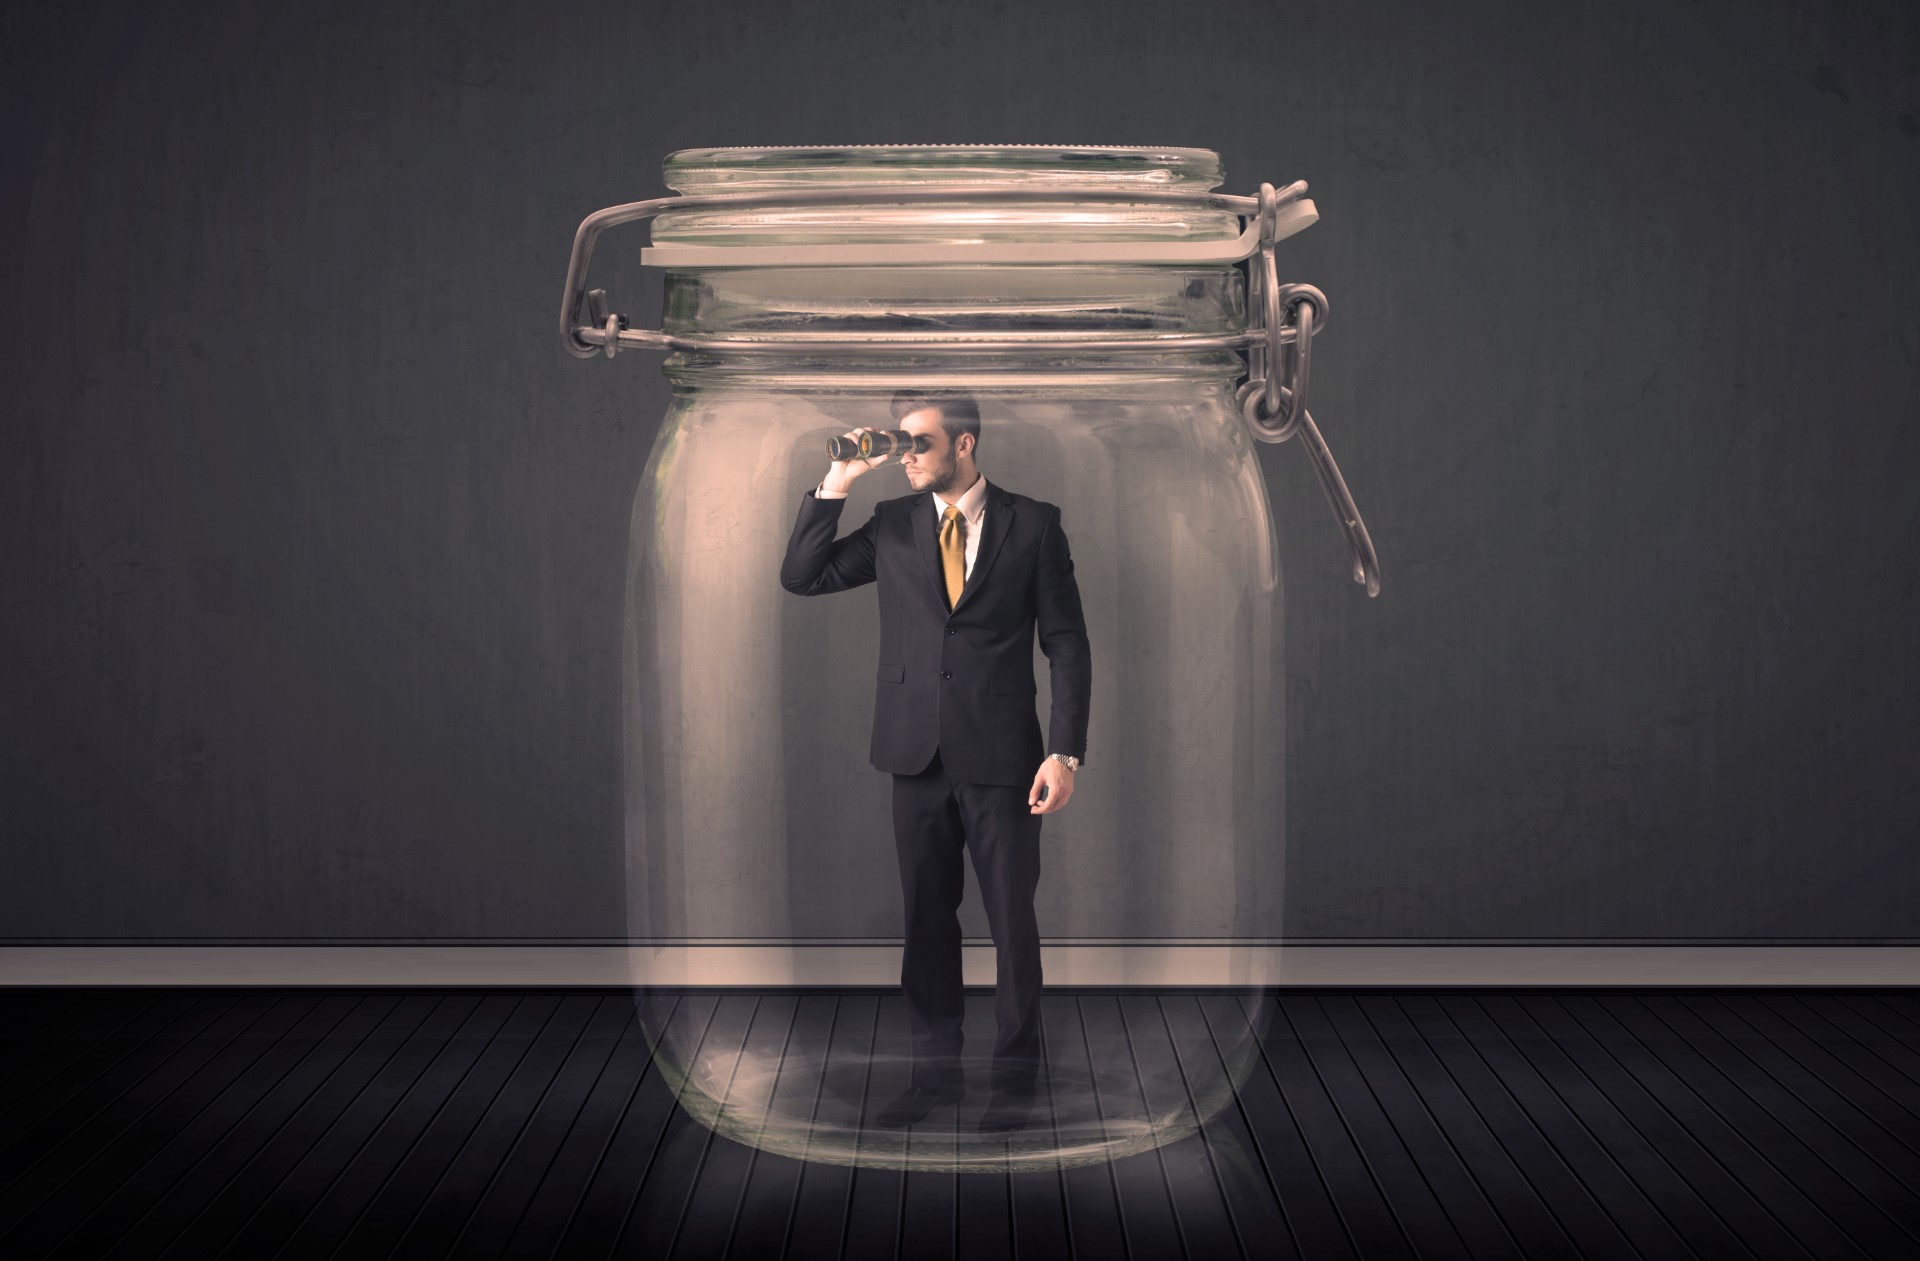 Is ‘Inside the Jar’ Thinking Putting Your Goals At Risk?